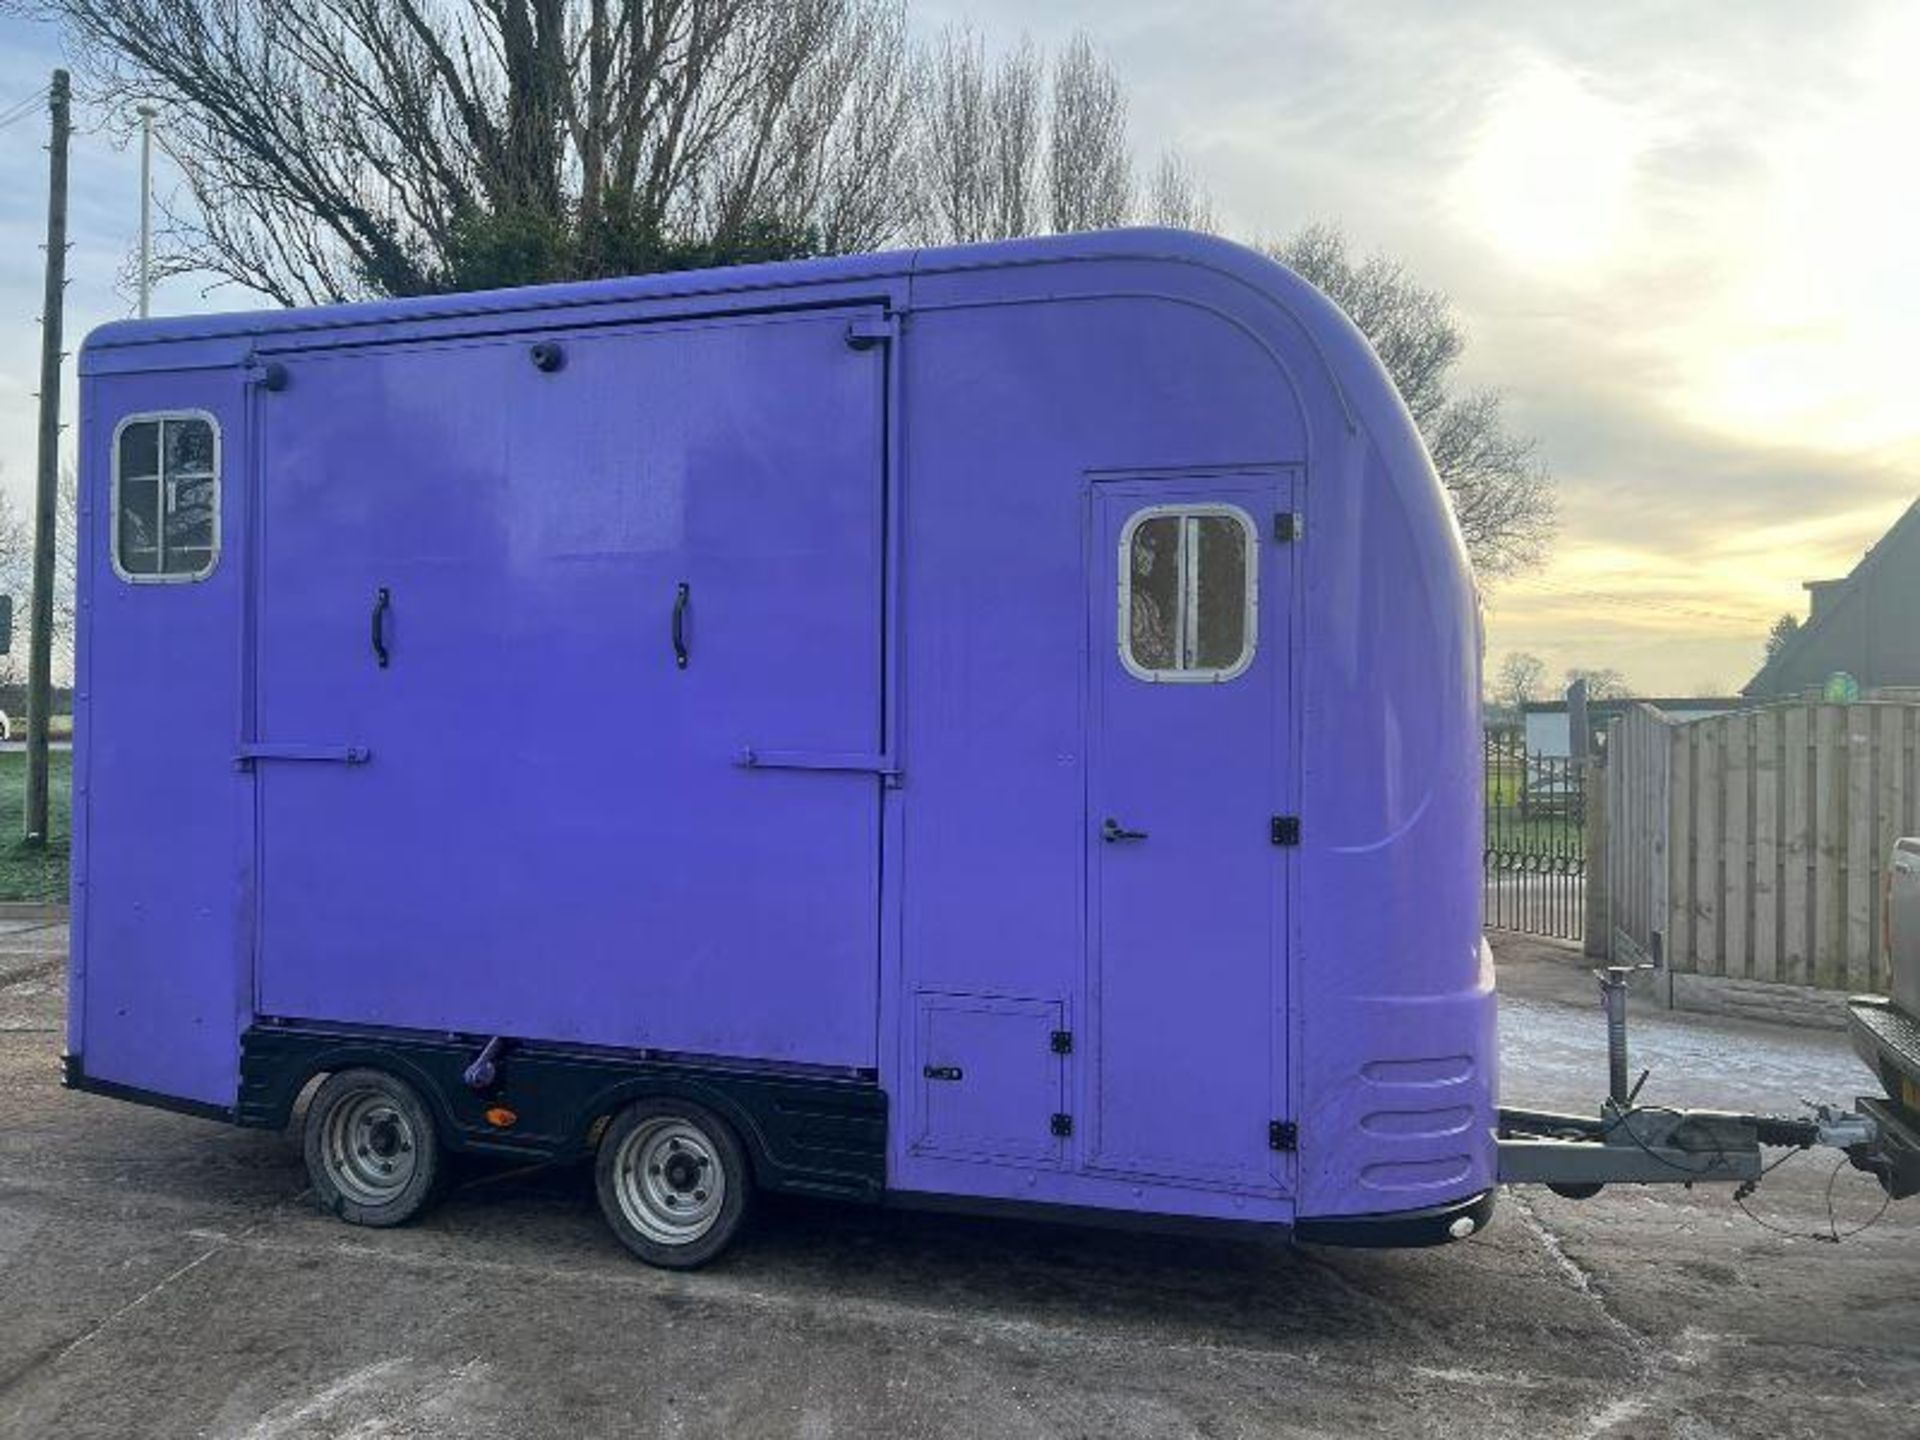 EQUITREK TWIN AXLE HORSE BOX *YEAR 2009* C/W LIVING AREA